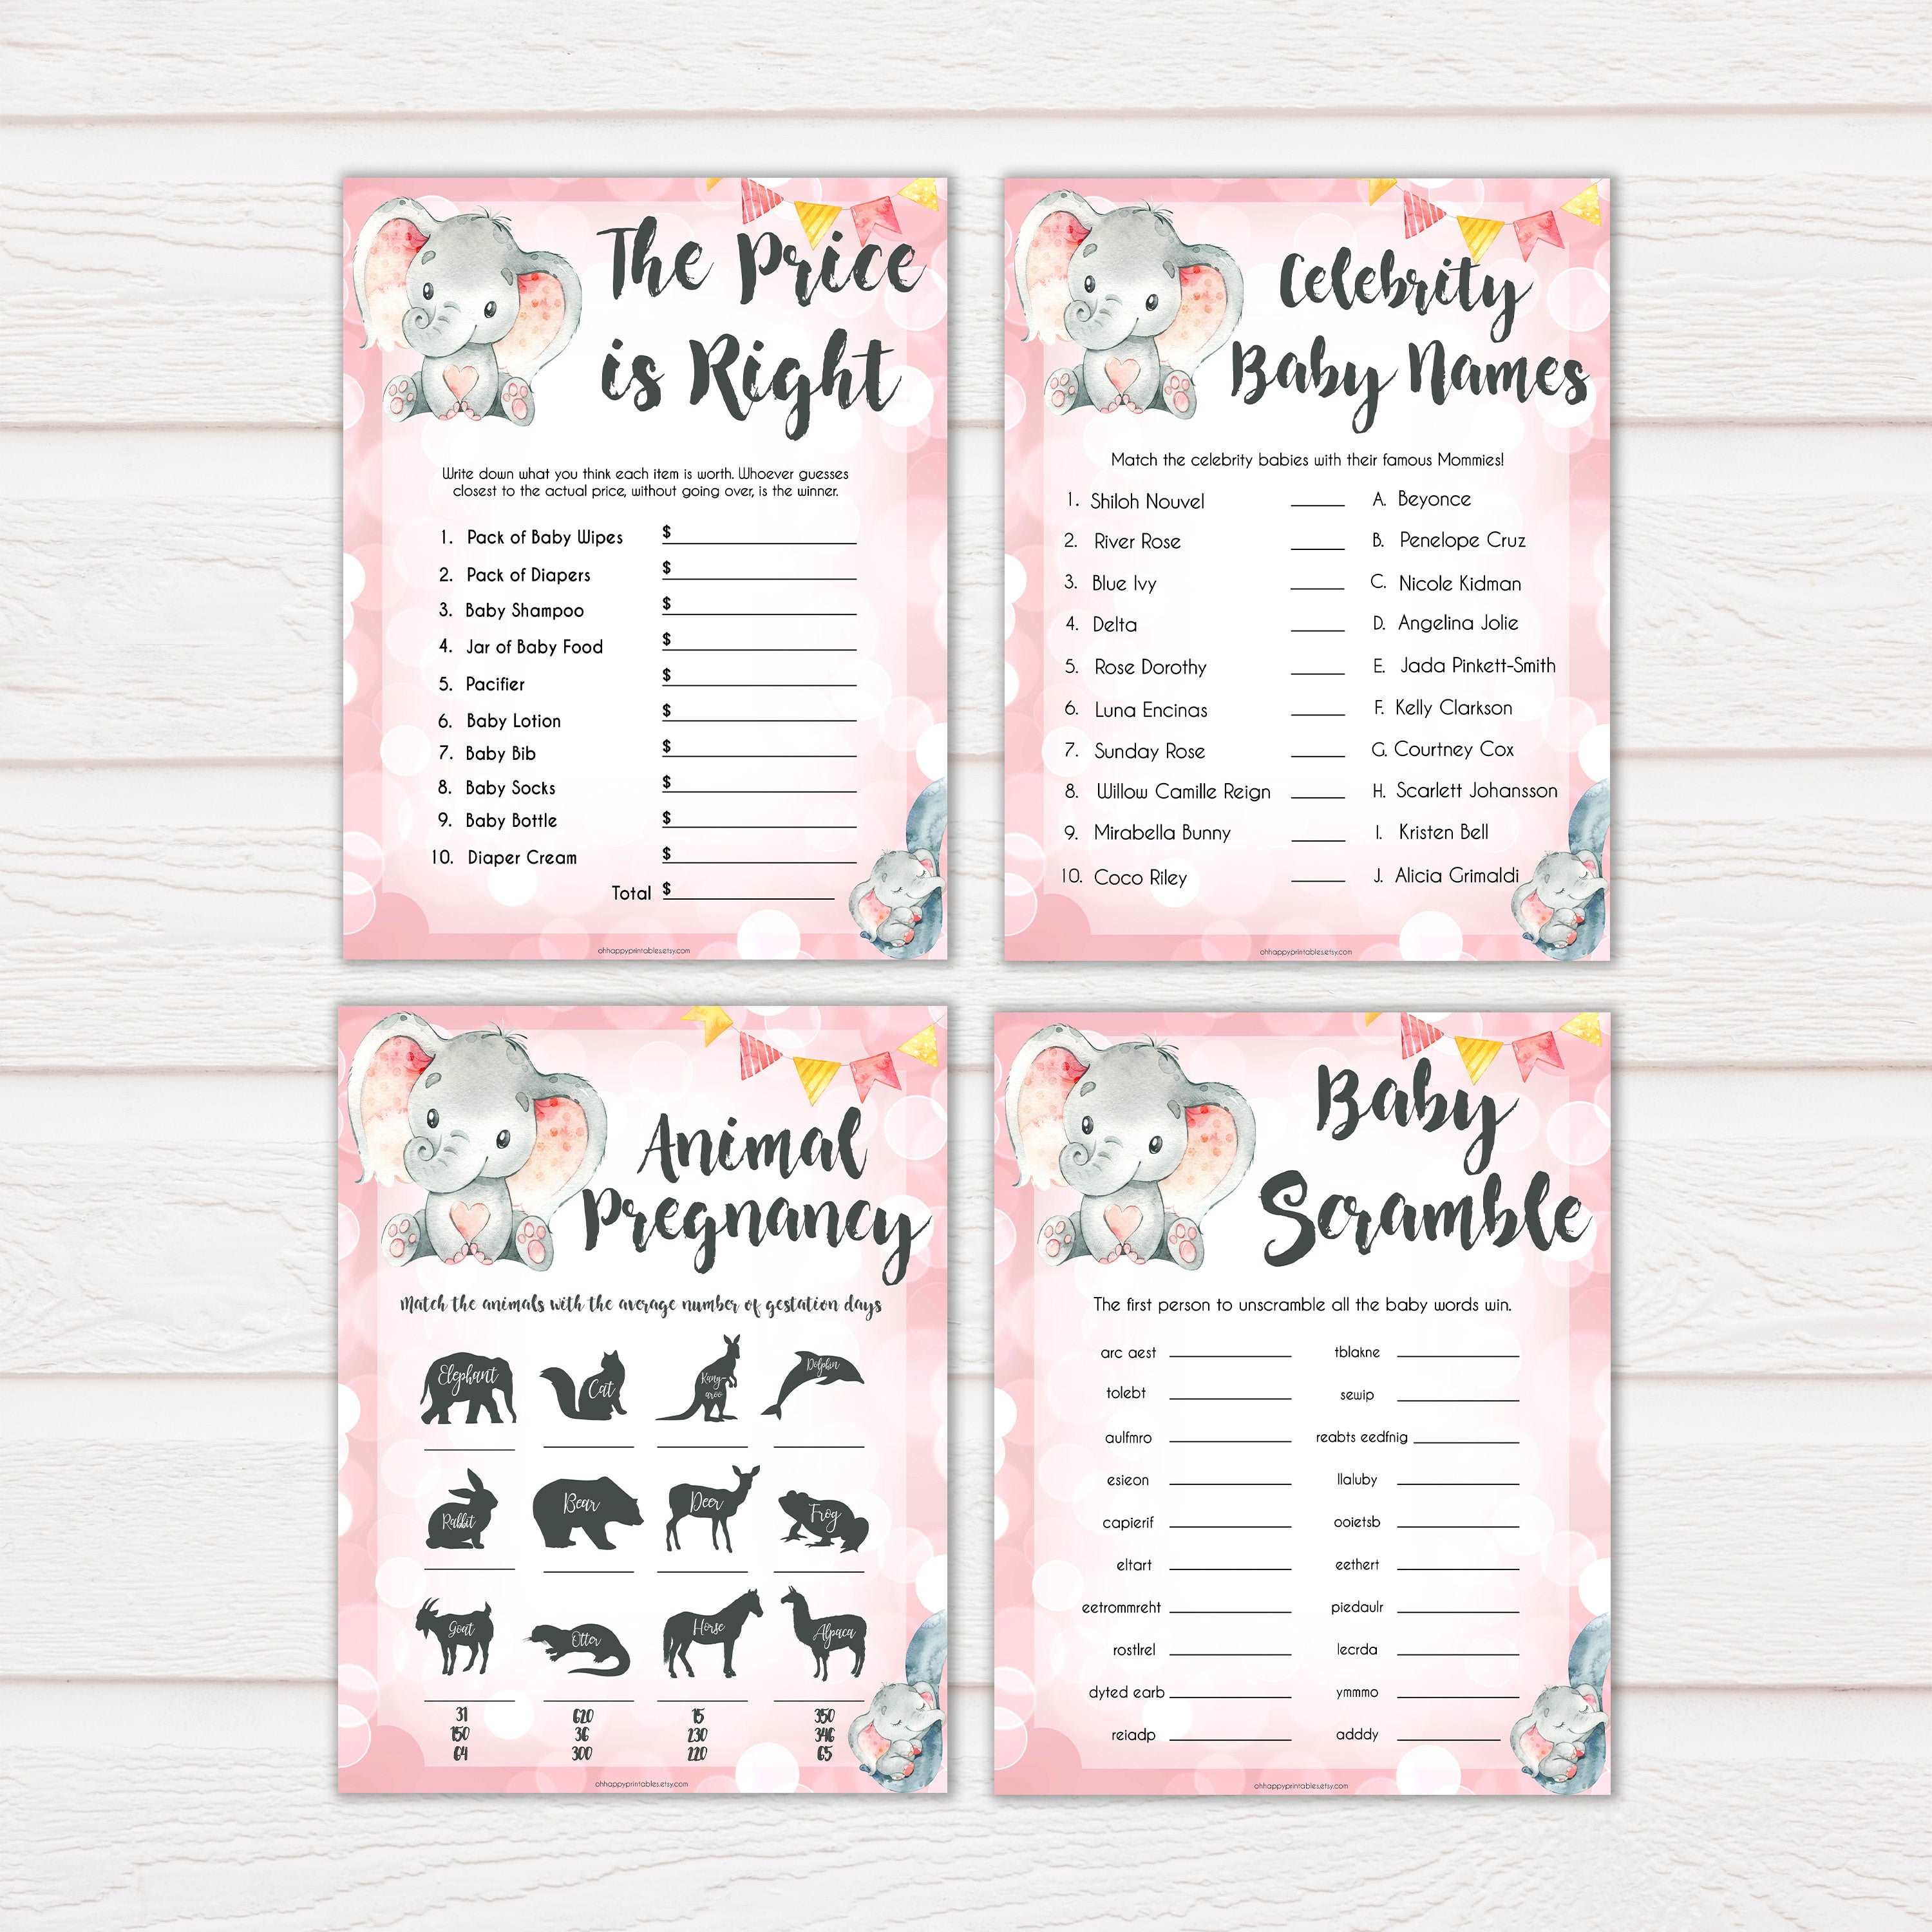 10 pink elephant baby games, animal pregnancy baby shower games, printable baby shower games, baby shower games, fun baby games, popular baby games, pink baby games baby shower games pack